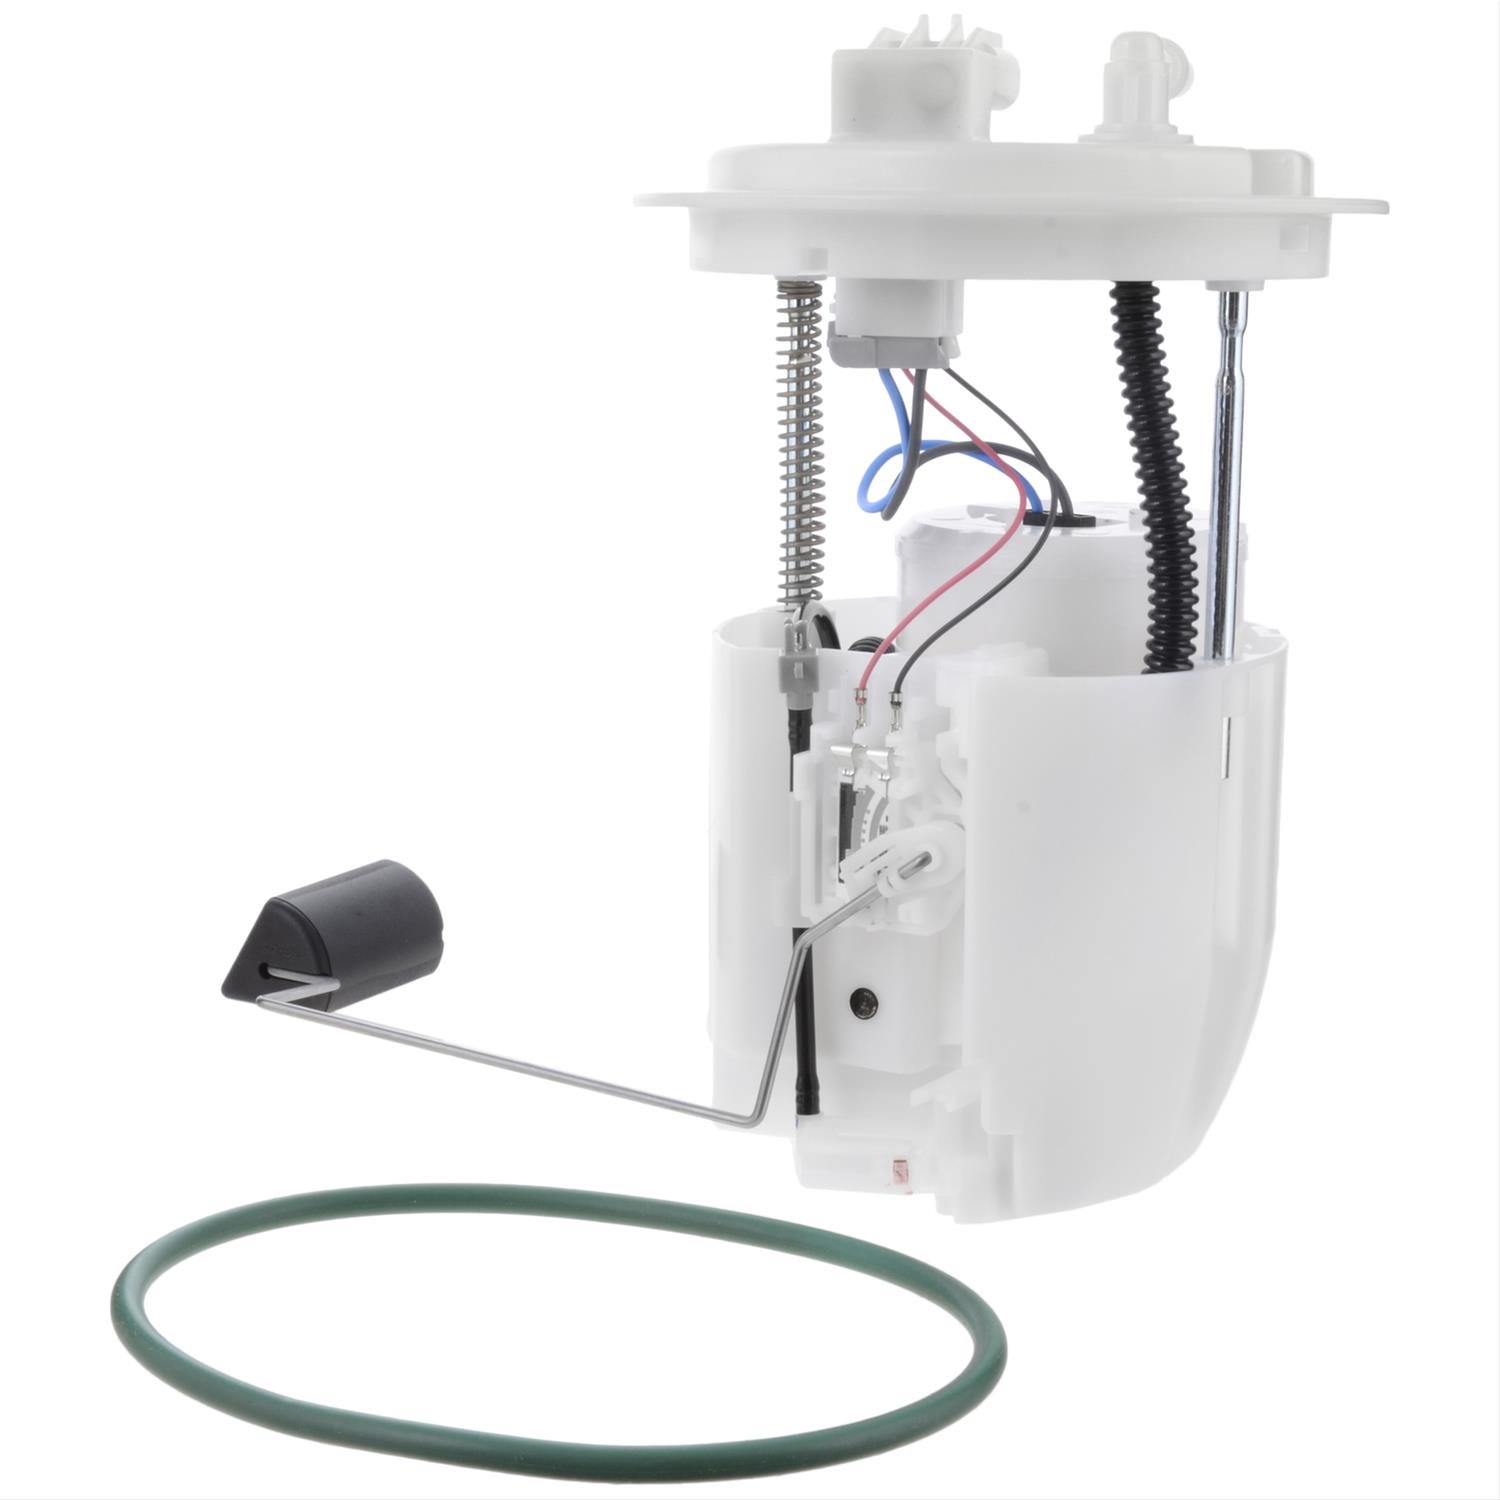 OE Chrysler/Dodge/Jeep Replacement Fuel Pump Module Assembly for 2007-2008 Jeep Wrangler